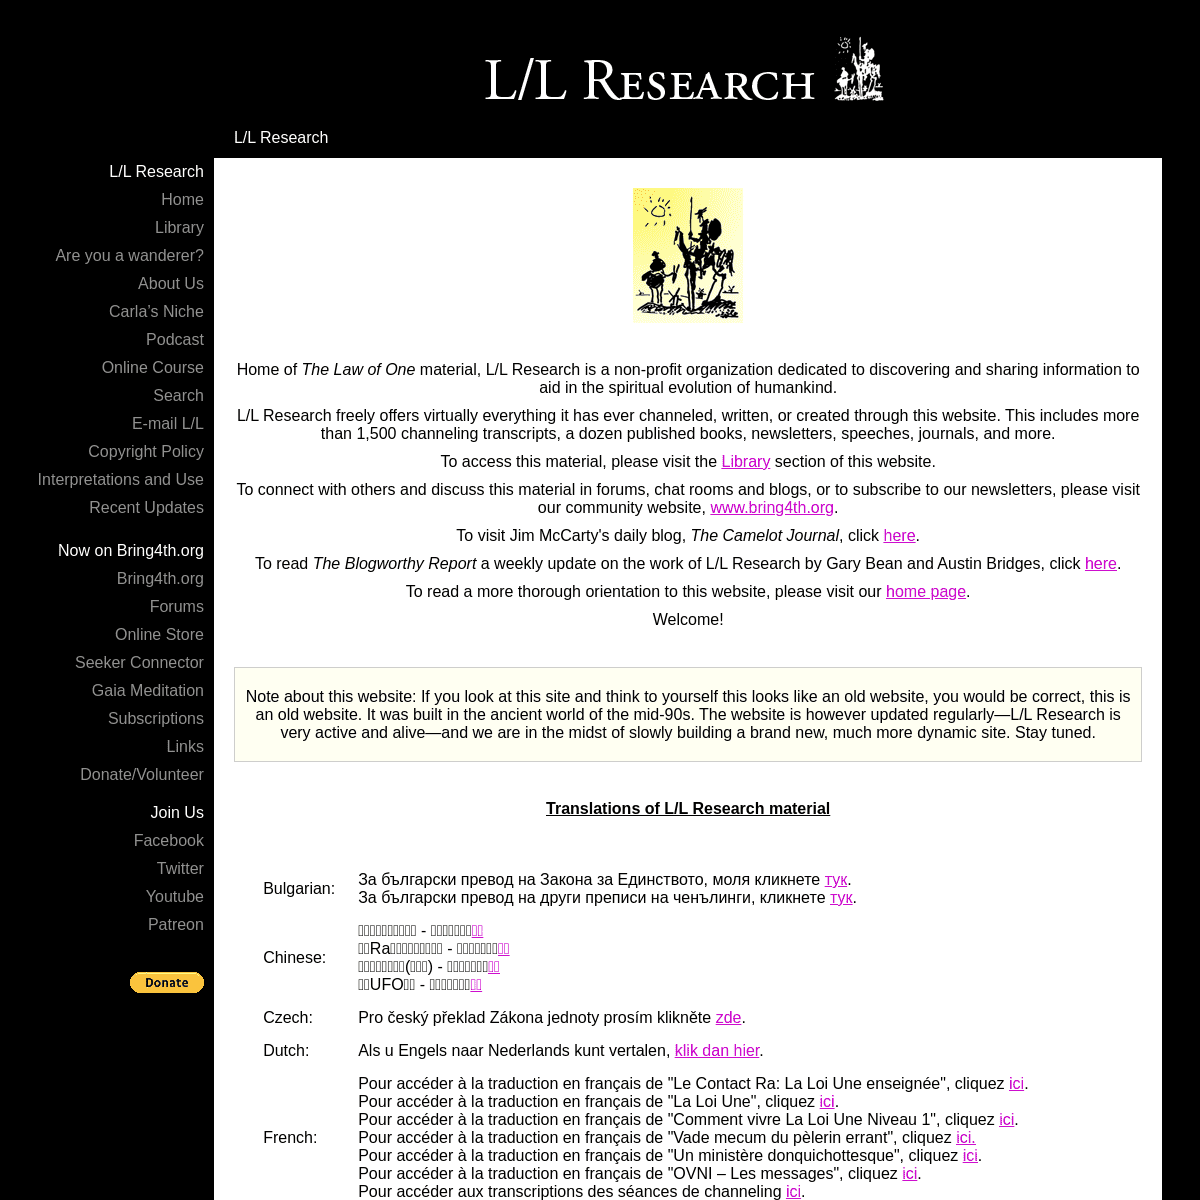 A complete backup of https://llresearch.org